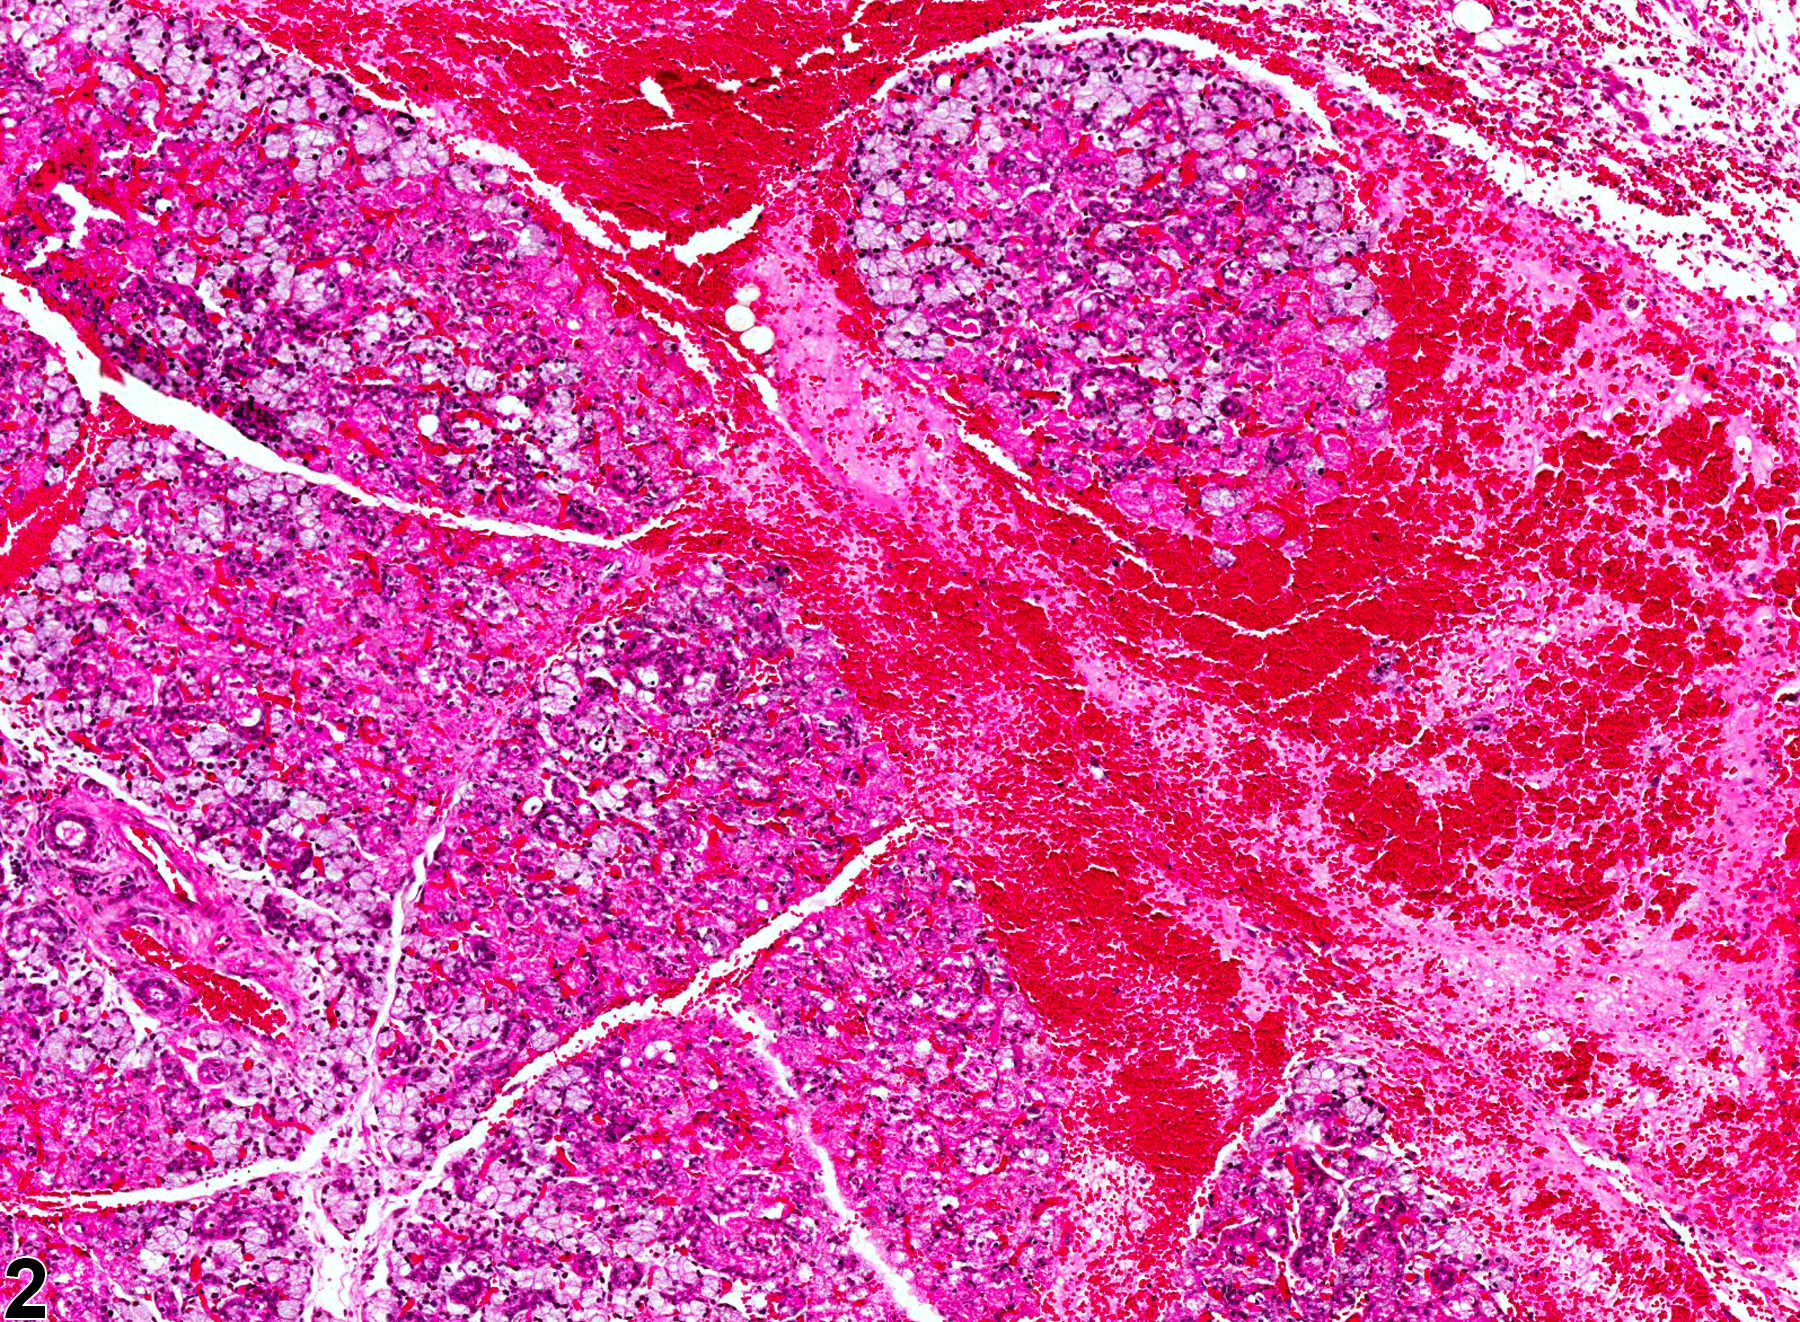 Image of hemorrhage in the salivary gland from a female B6C3F1 mouse in a chronic study